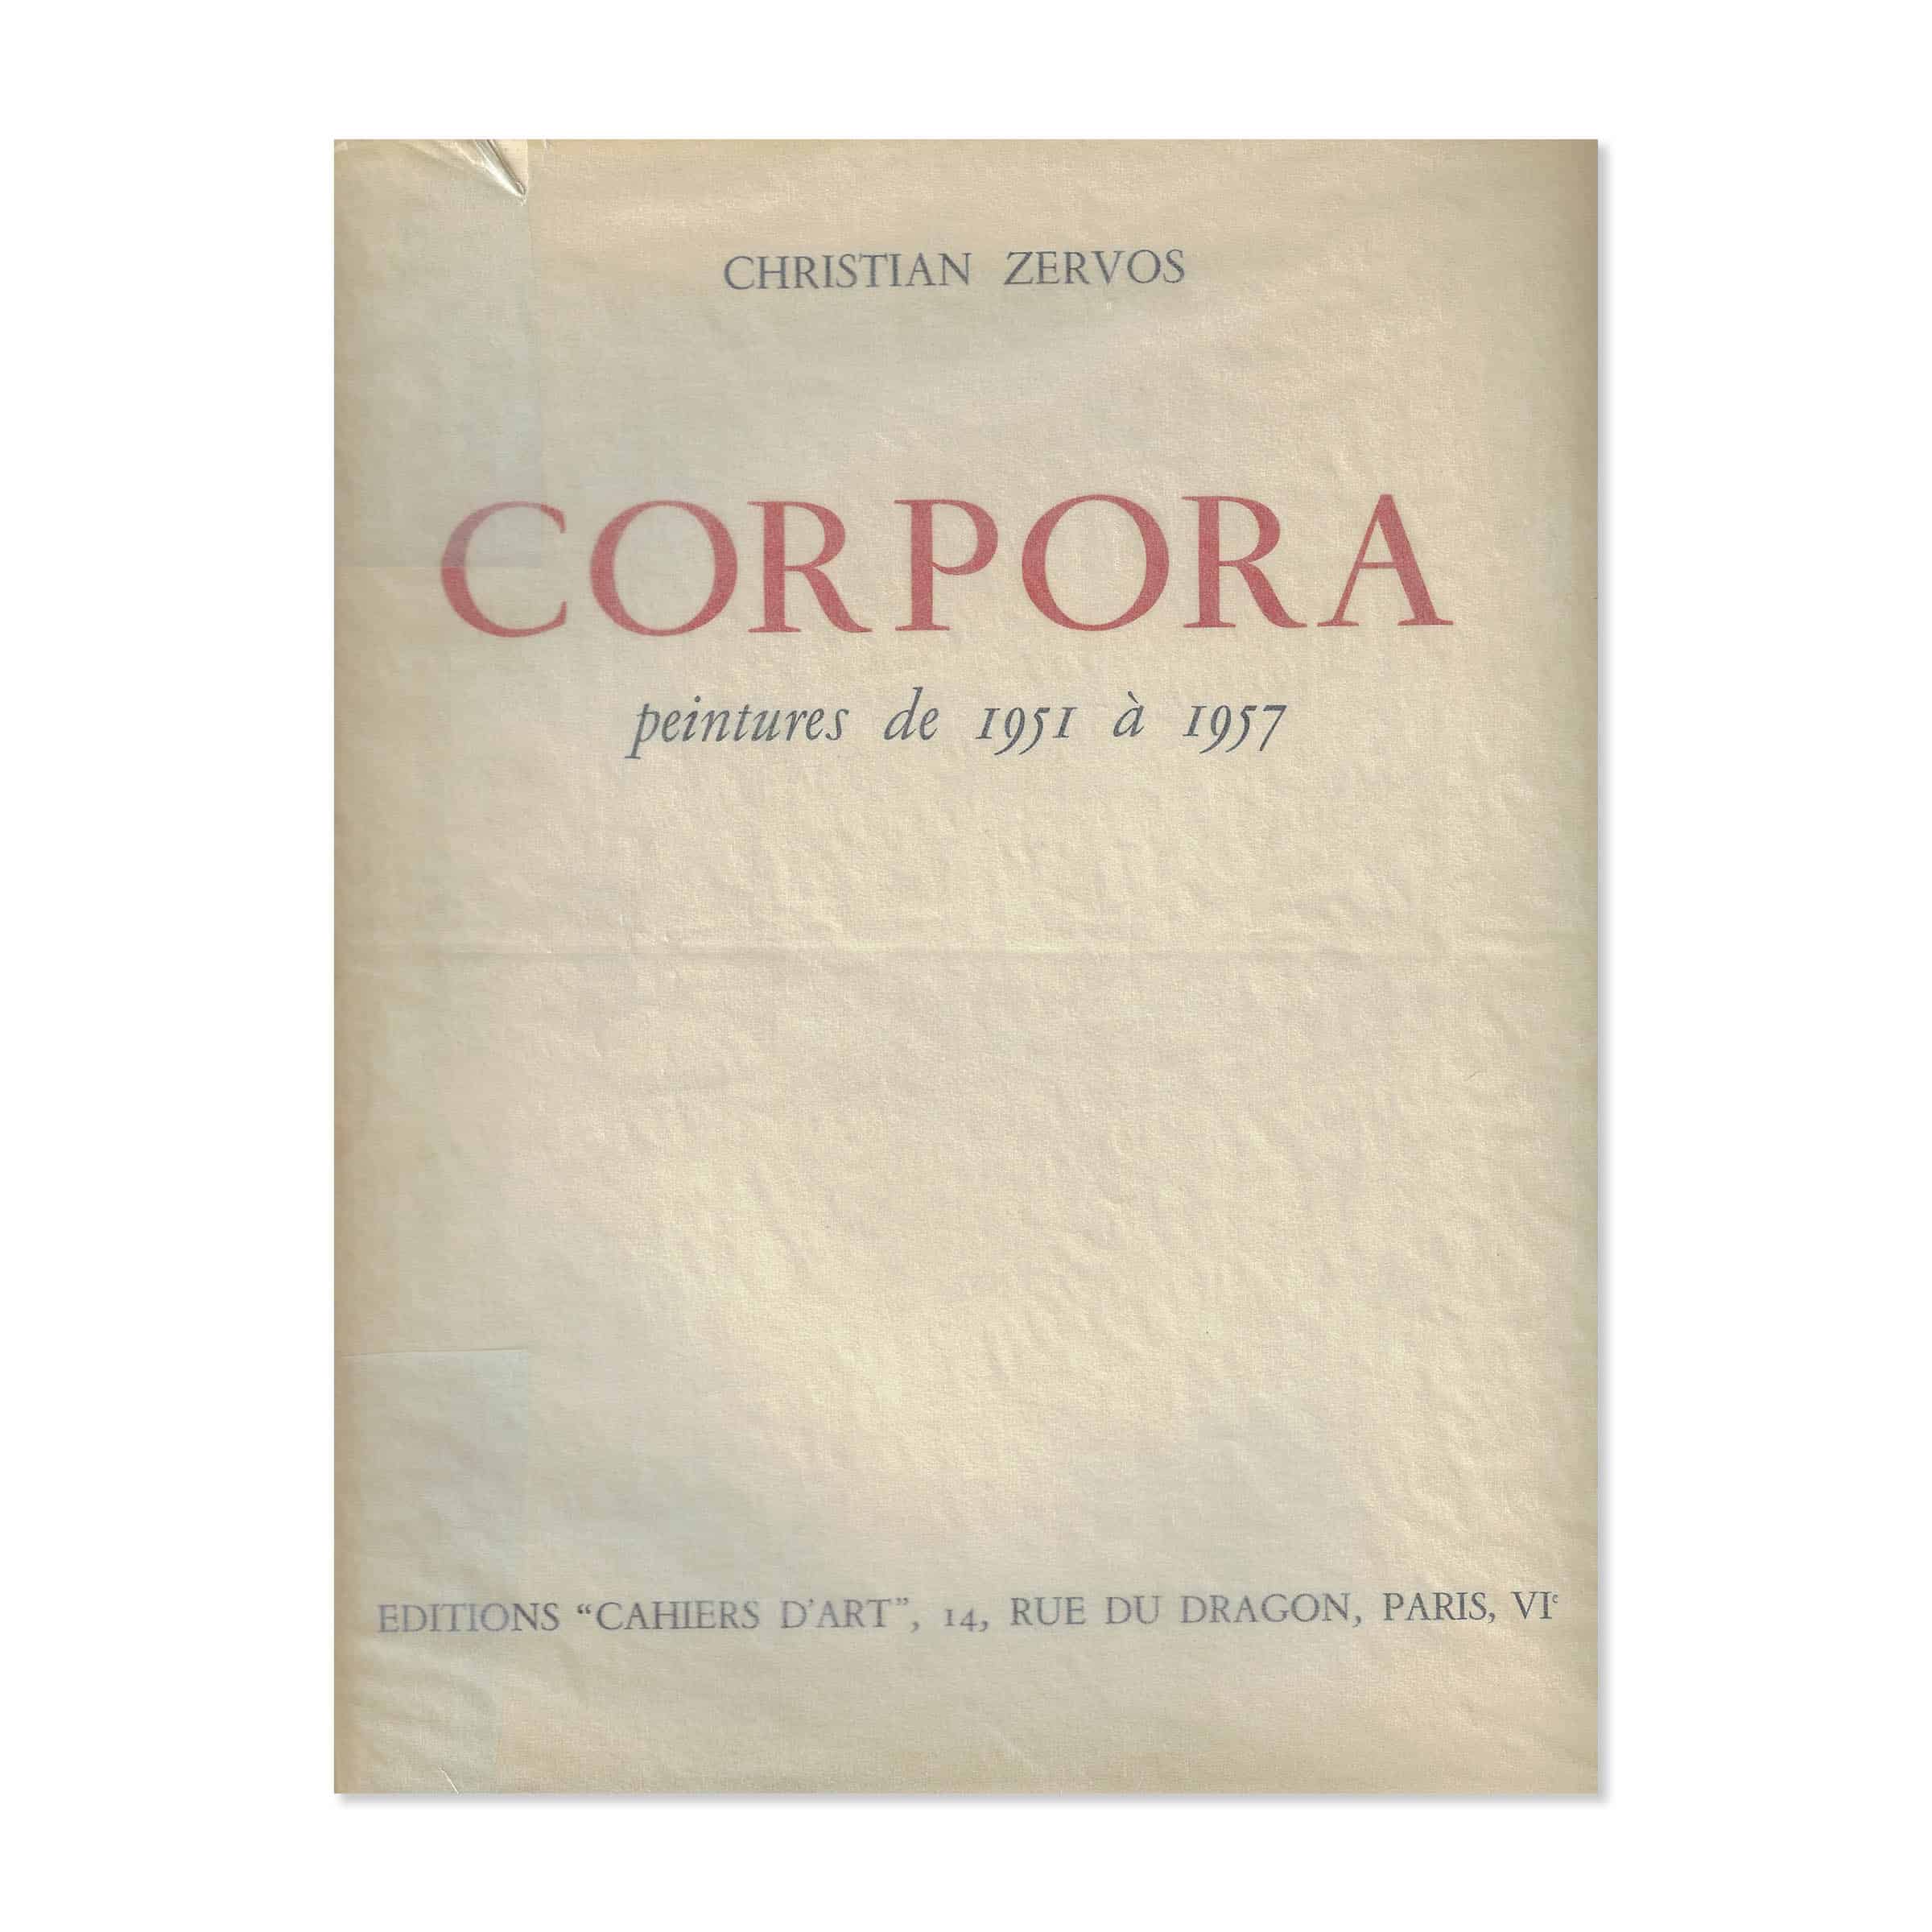 Corpora by Christian Zervos. Cover view